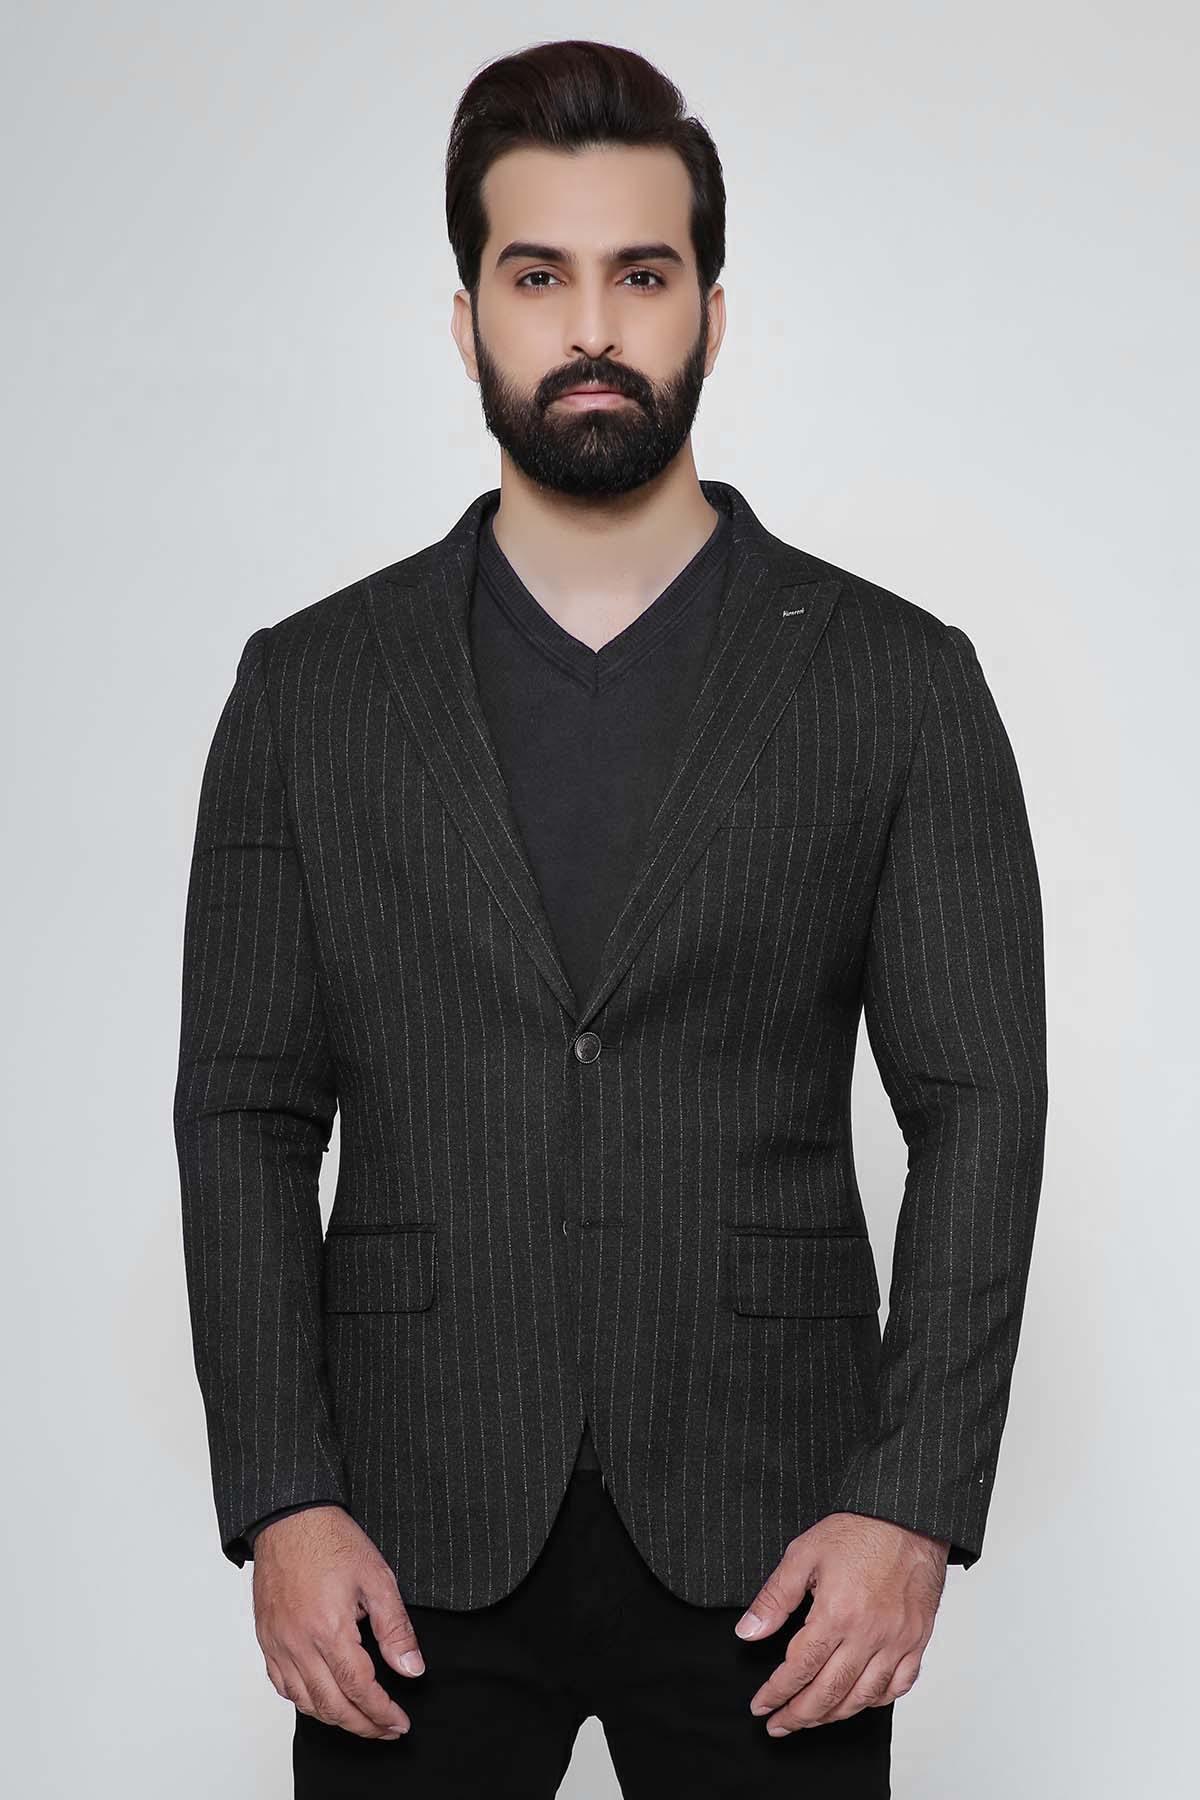 CASUAL COAT SLIM FIT CHARCOAL at Charcoal Clothing